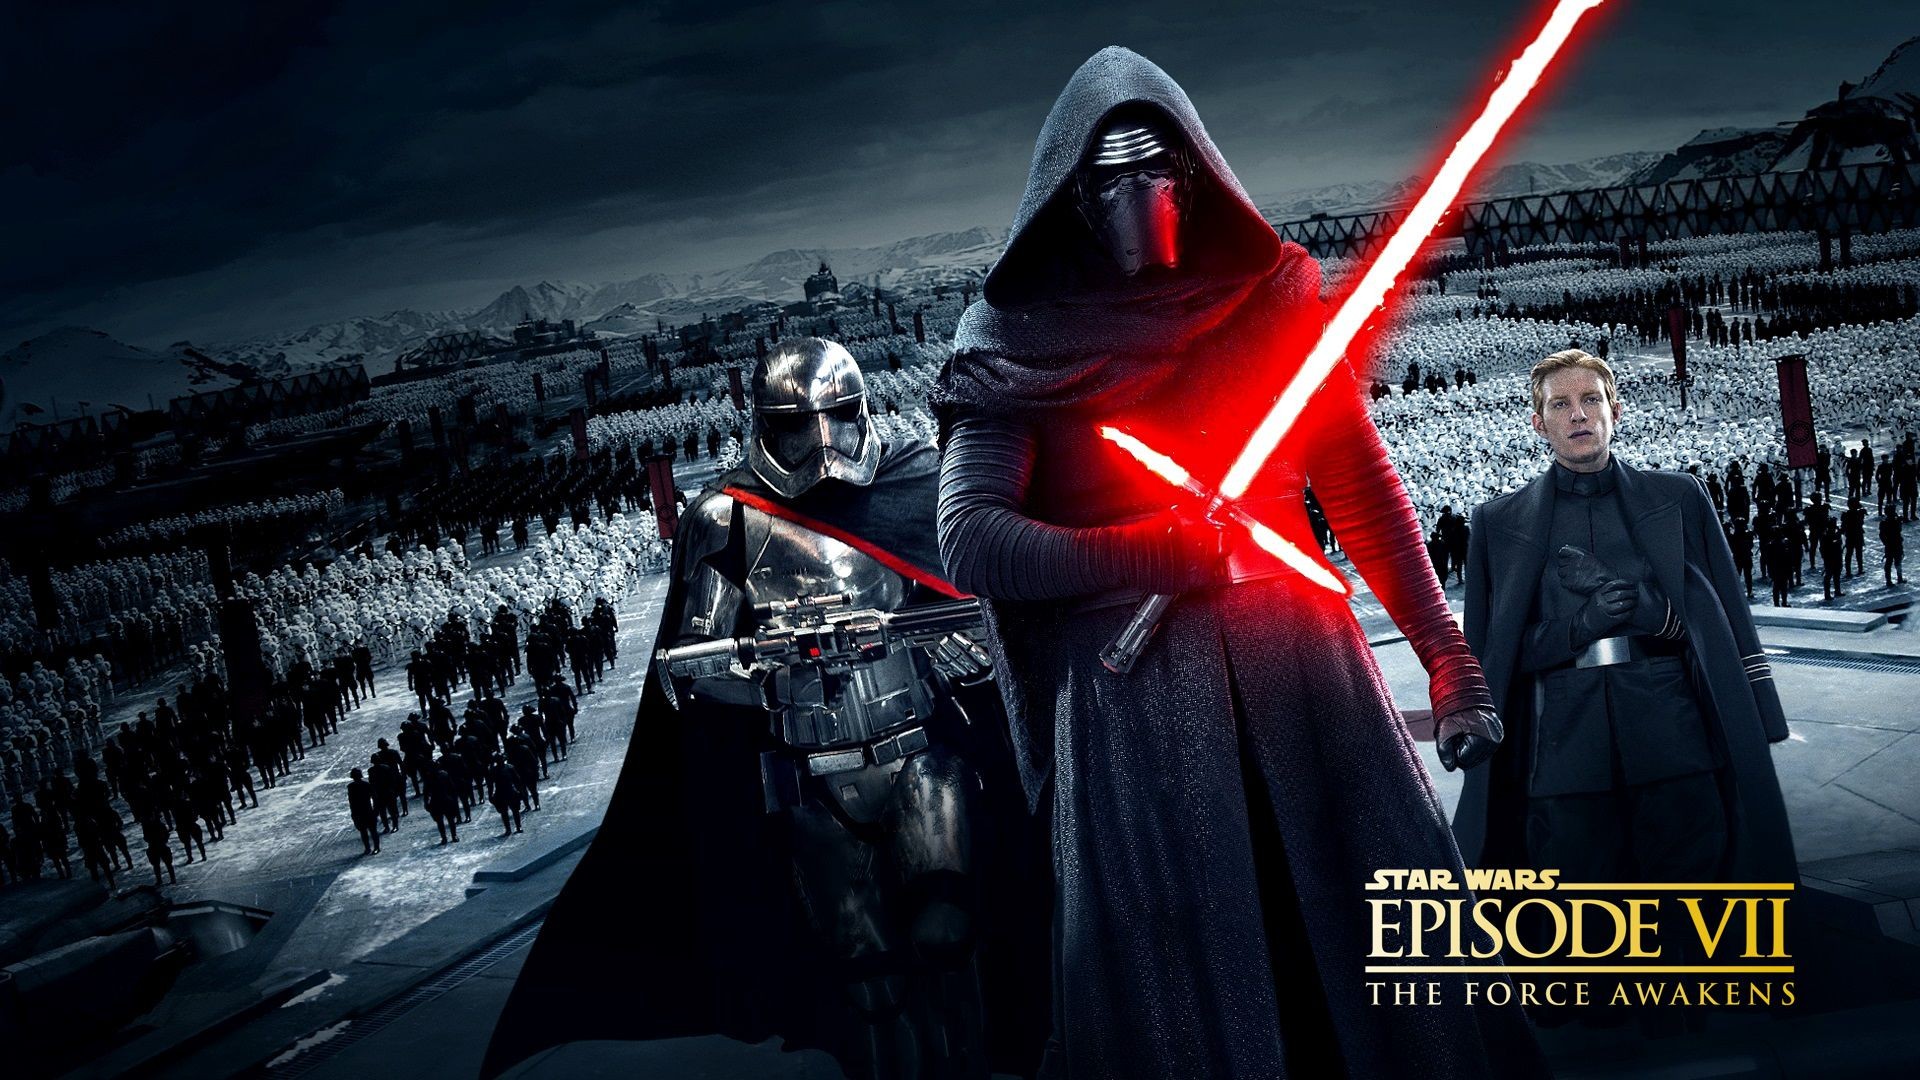 Star Wars Star Wars The Force Awakens Lightsaber Sith Science Fiction Kylo Ren Captain Phasma Star W 1920x1080